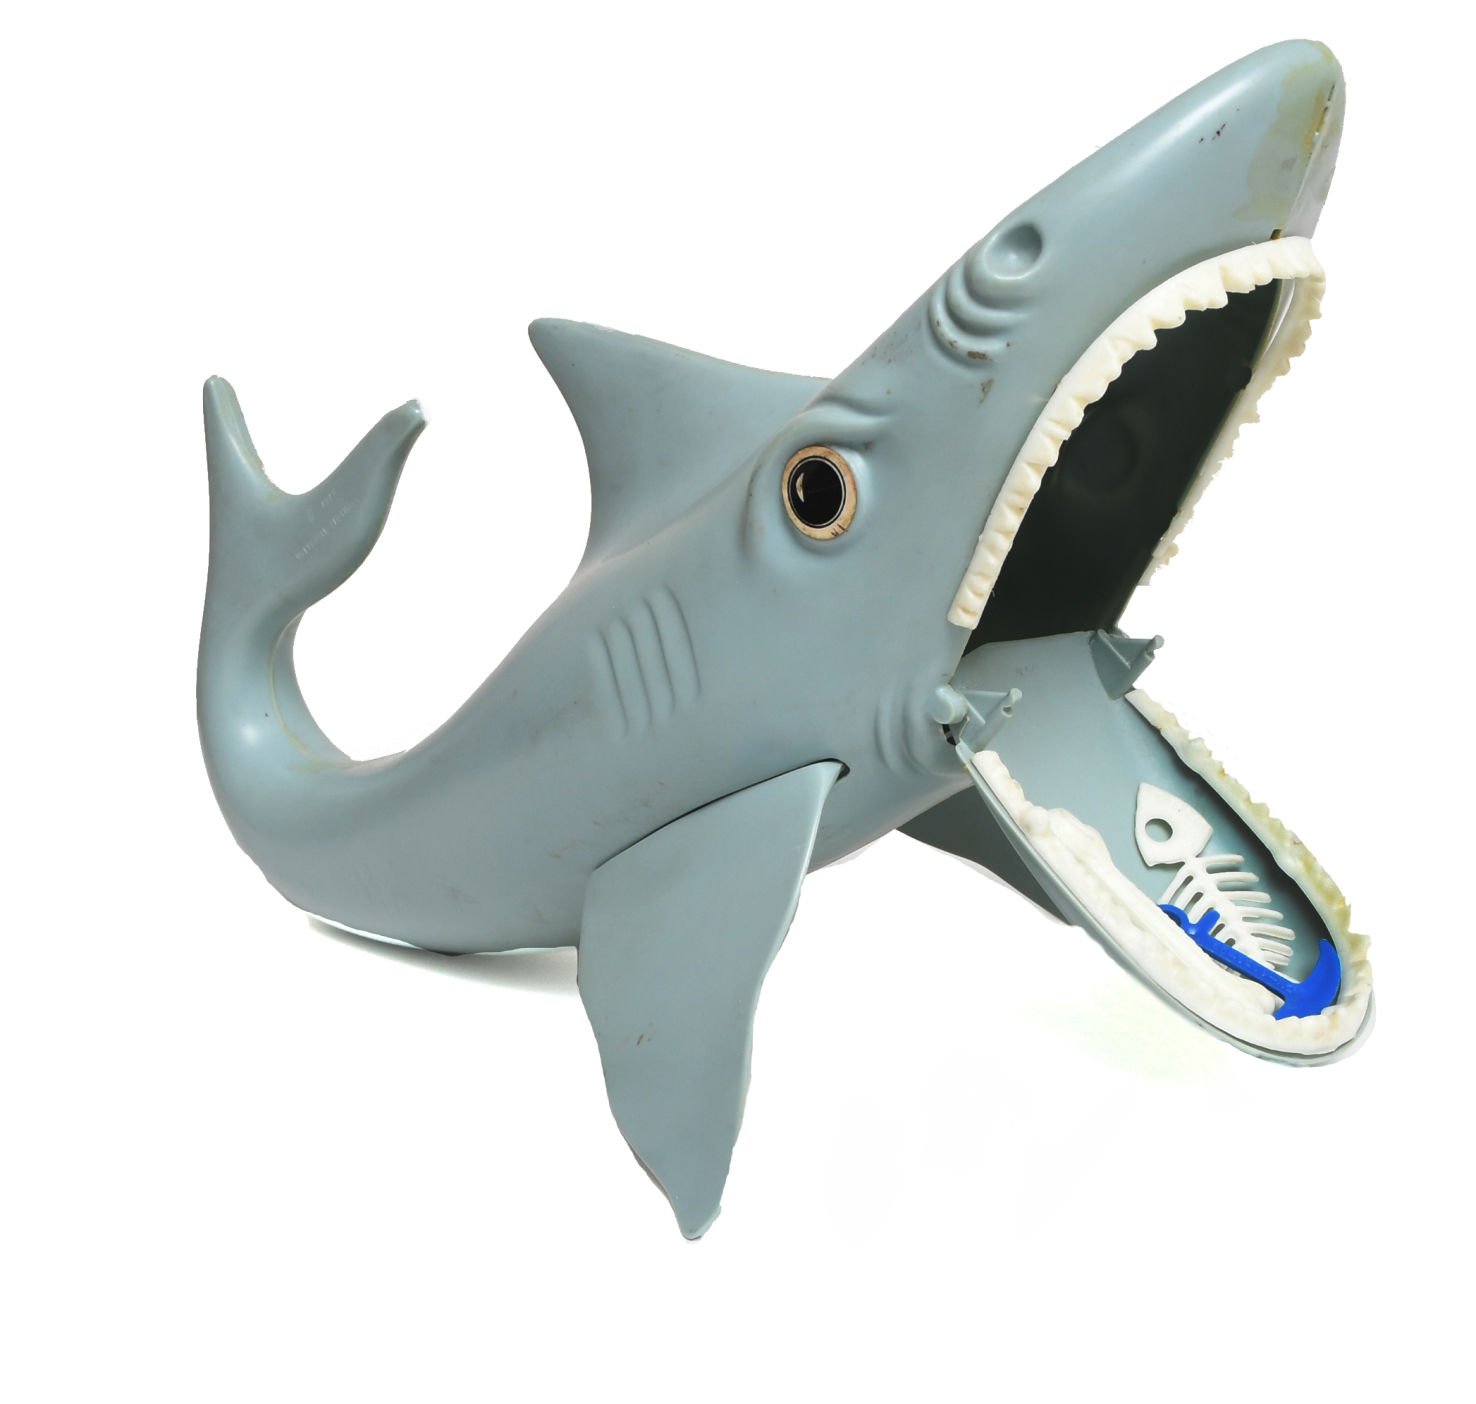 shark toy that opens mouth